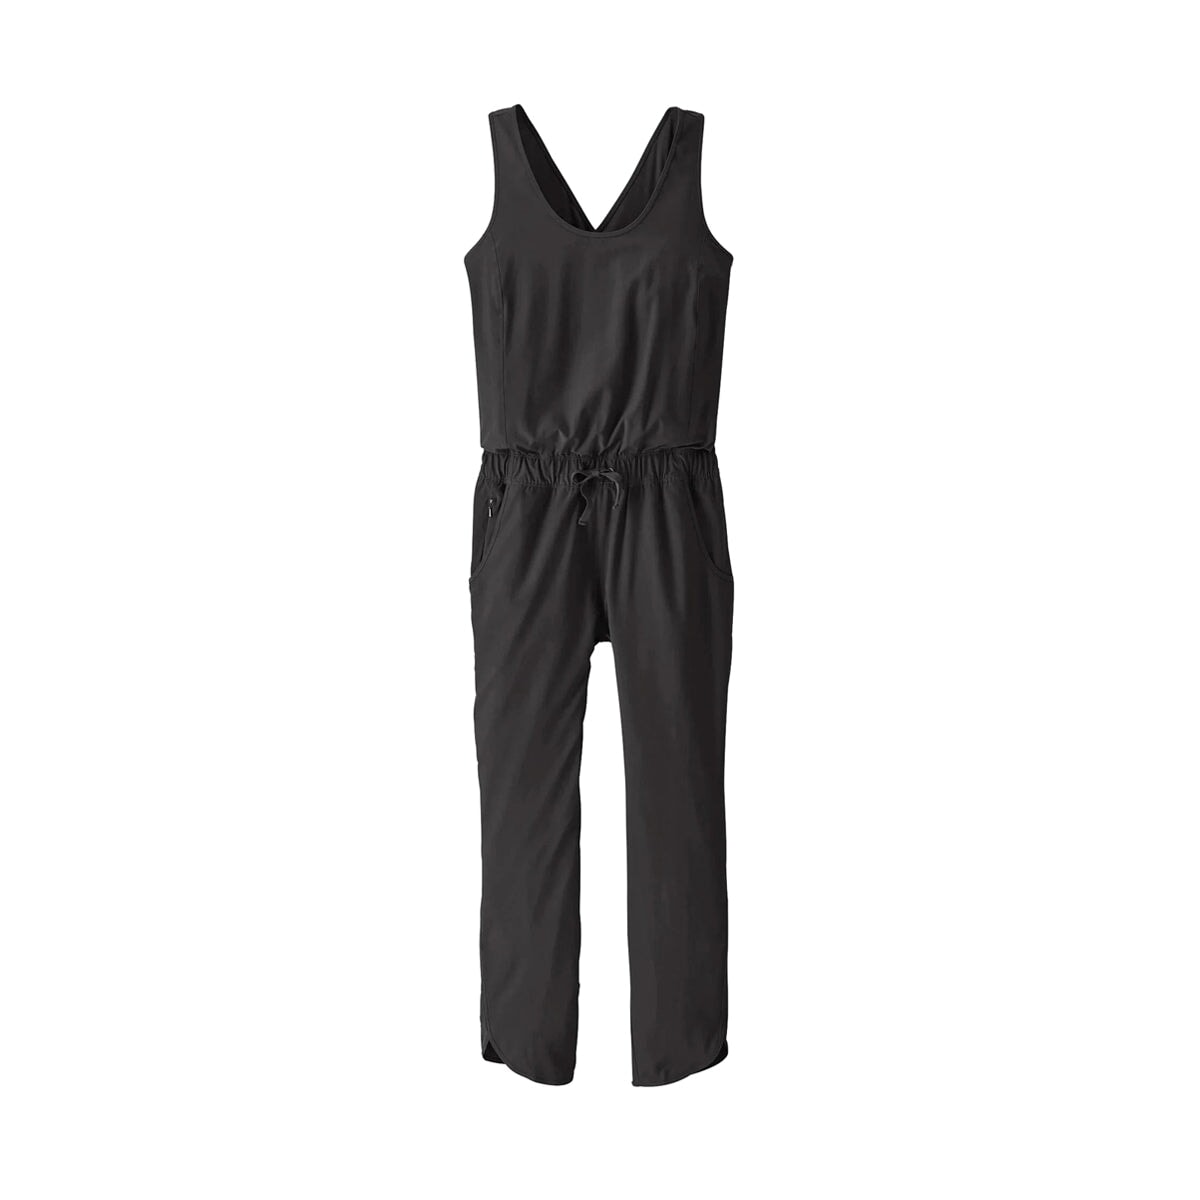 Patagonia Women's Fleetwith Romper - Black Overall Patagonia 